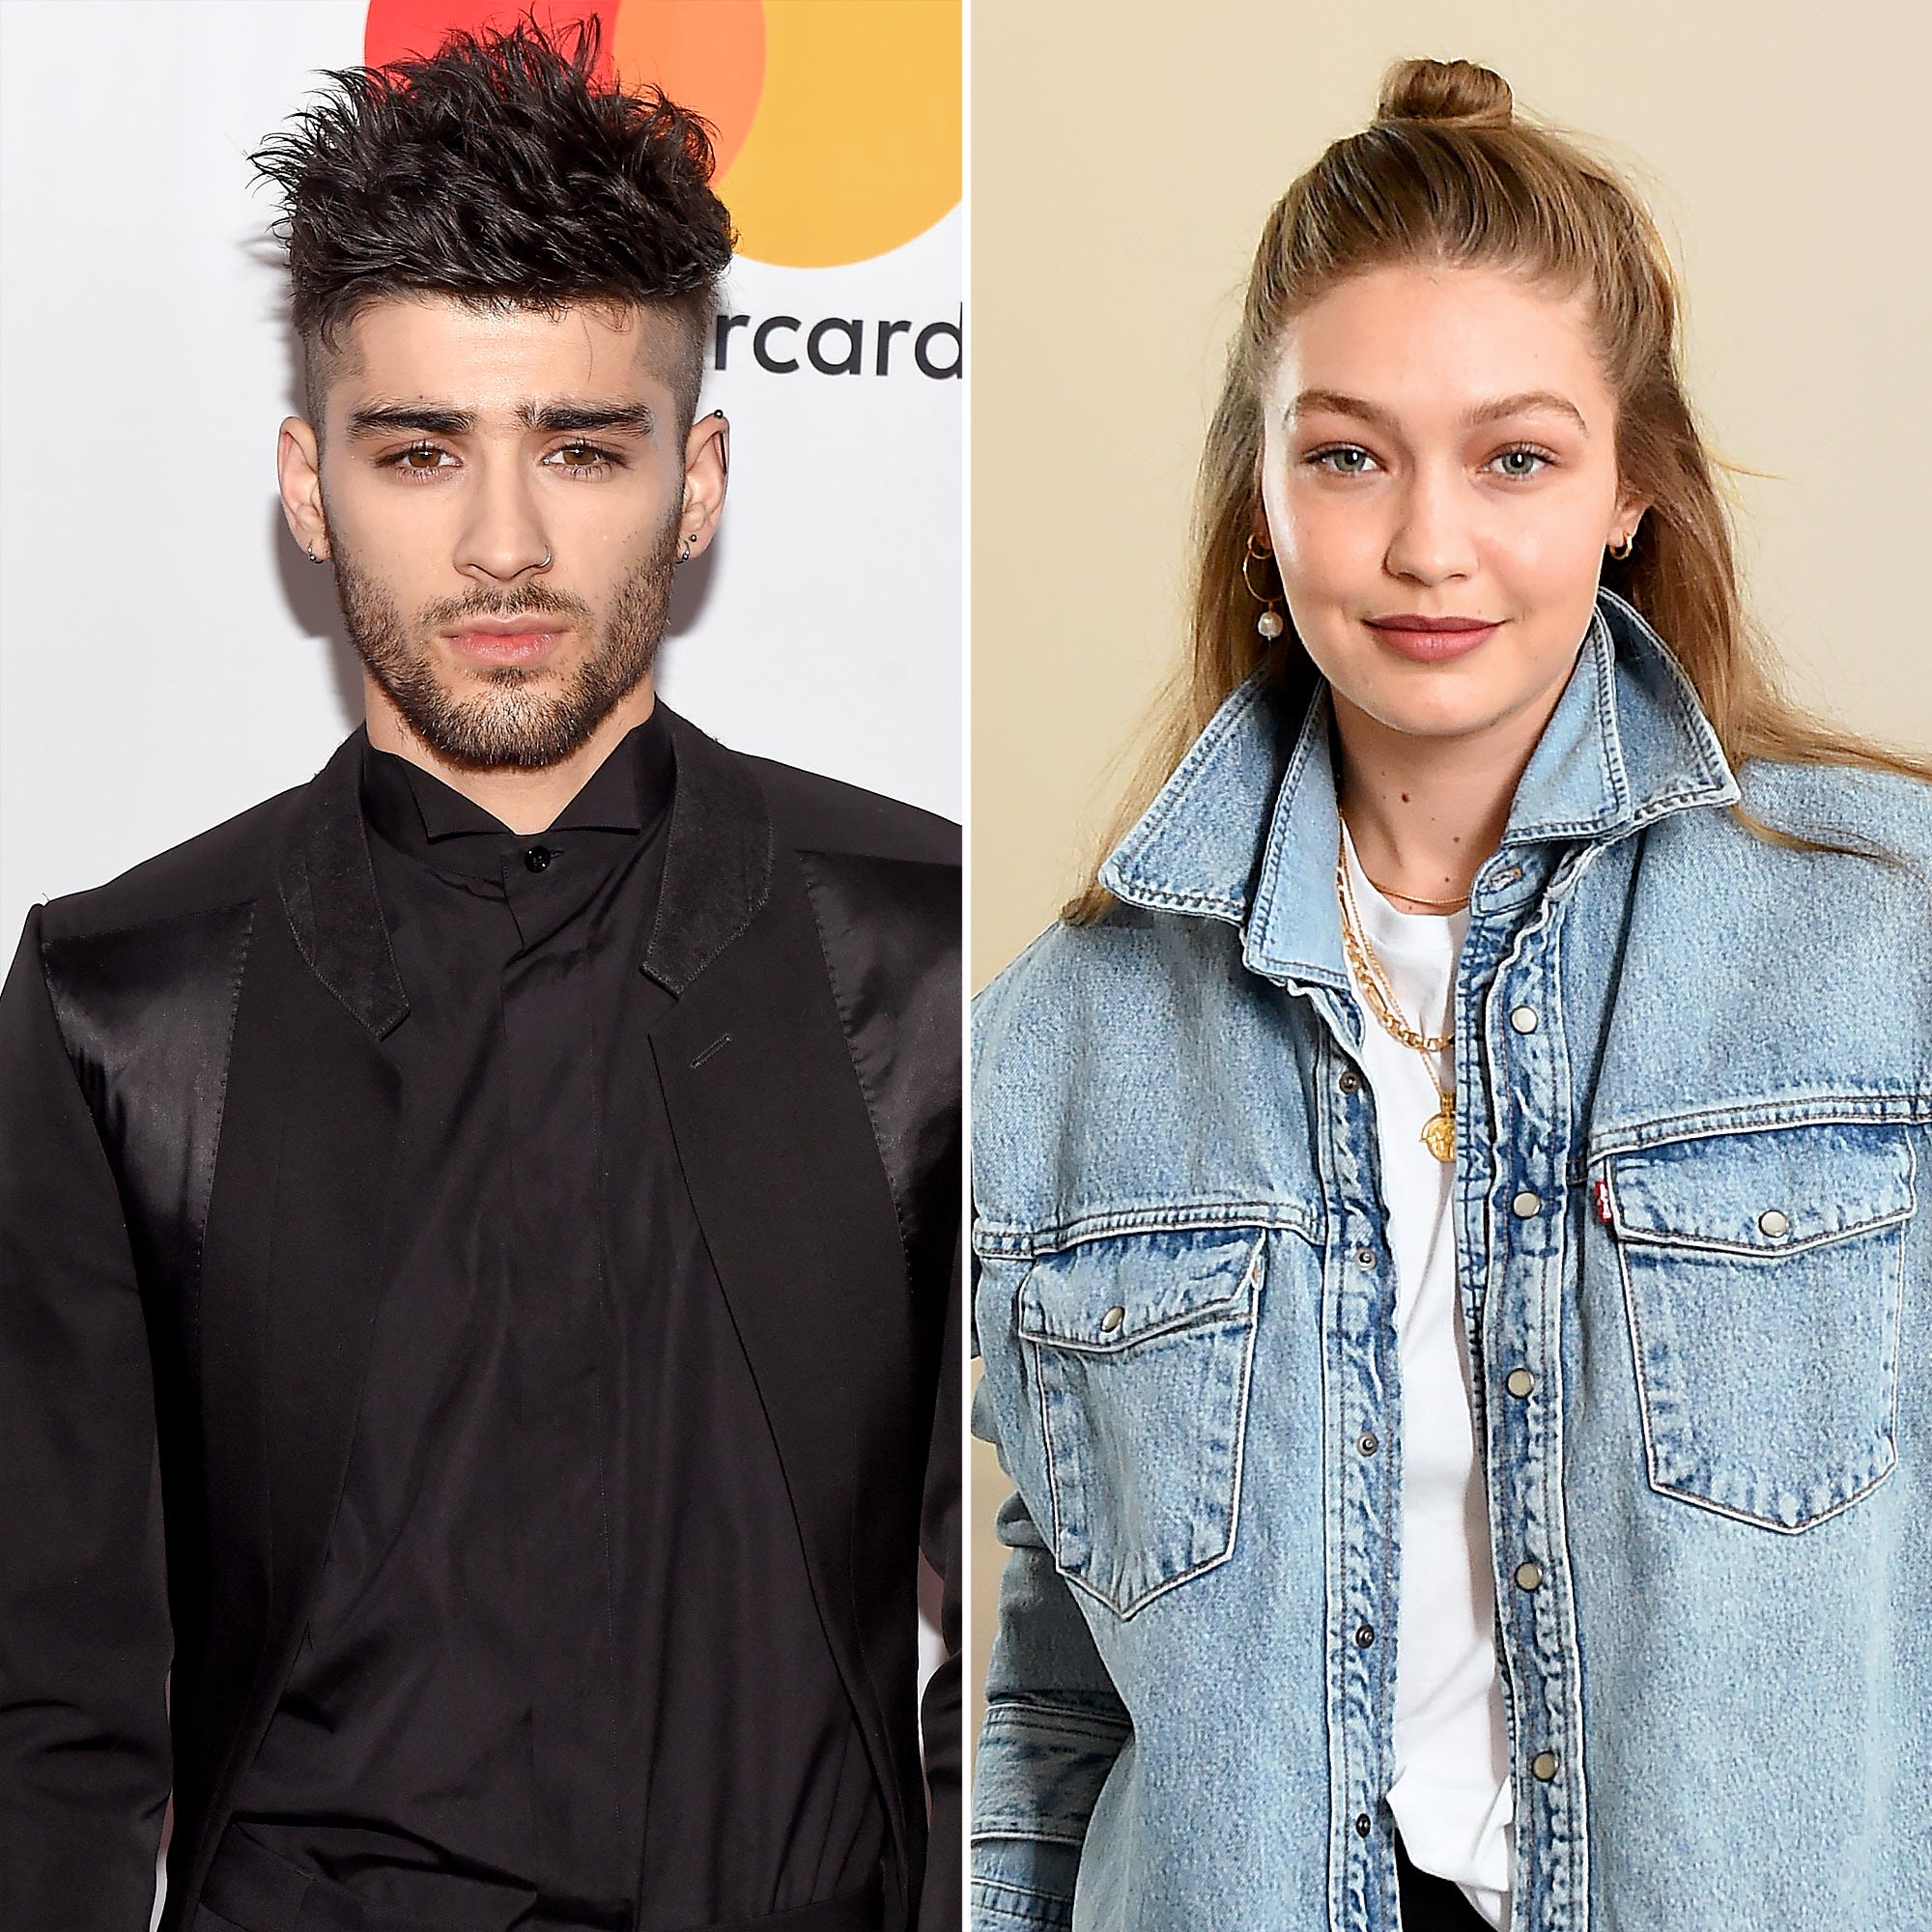 Zayn Malik Would Have Daughter Khai '90 Percent' of the Time 'If I Could'